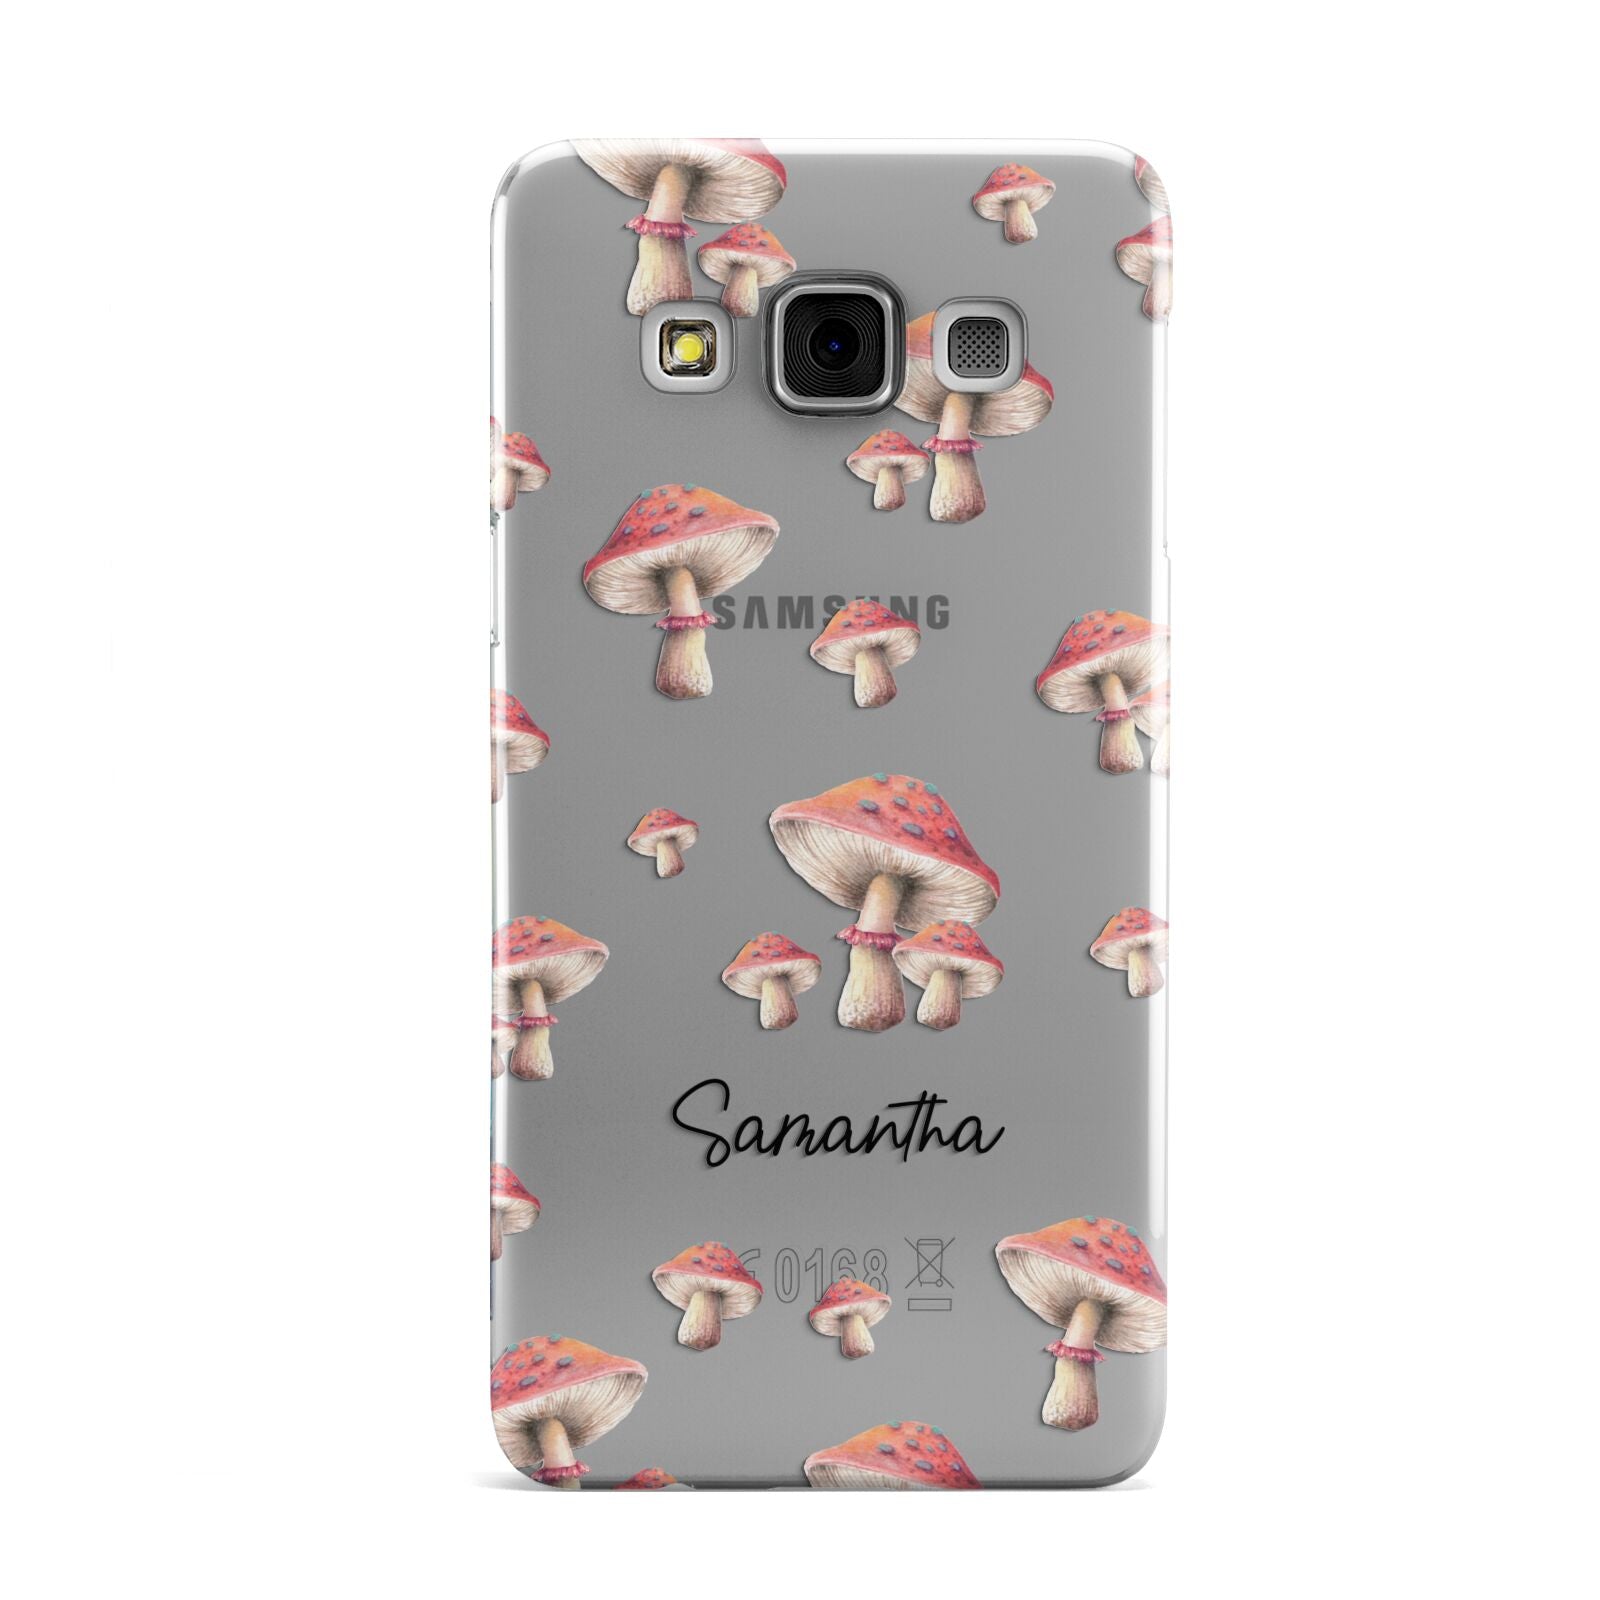 Mushroom Illustrations with Name Samsung Galaxy A3 Case